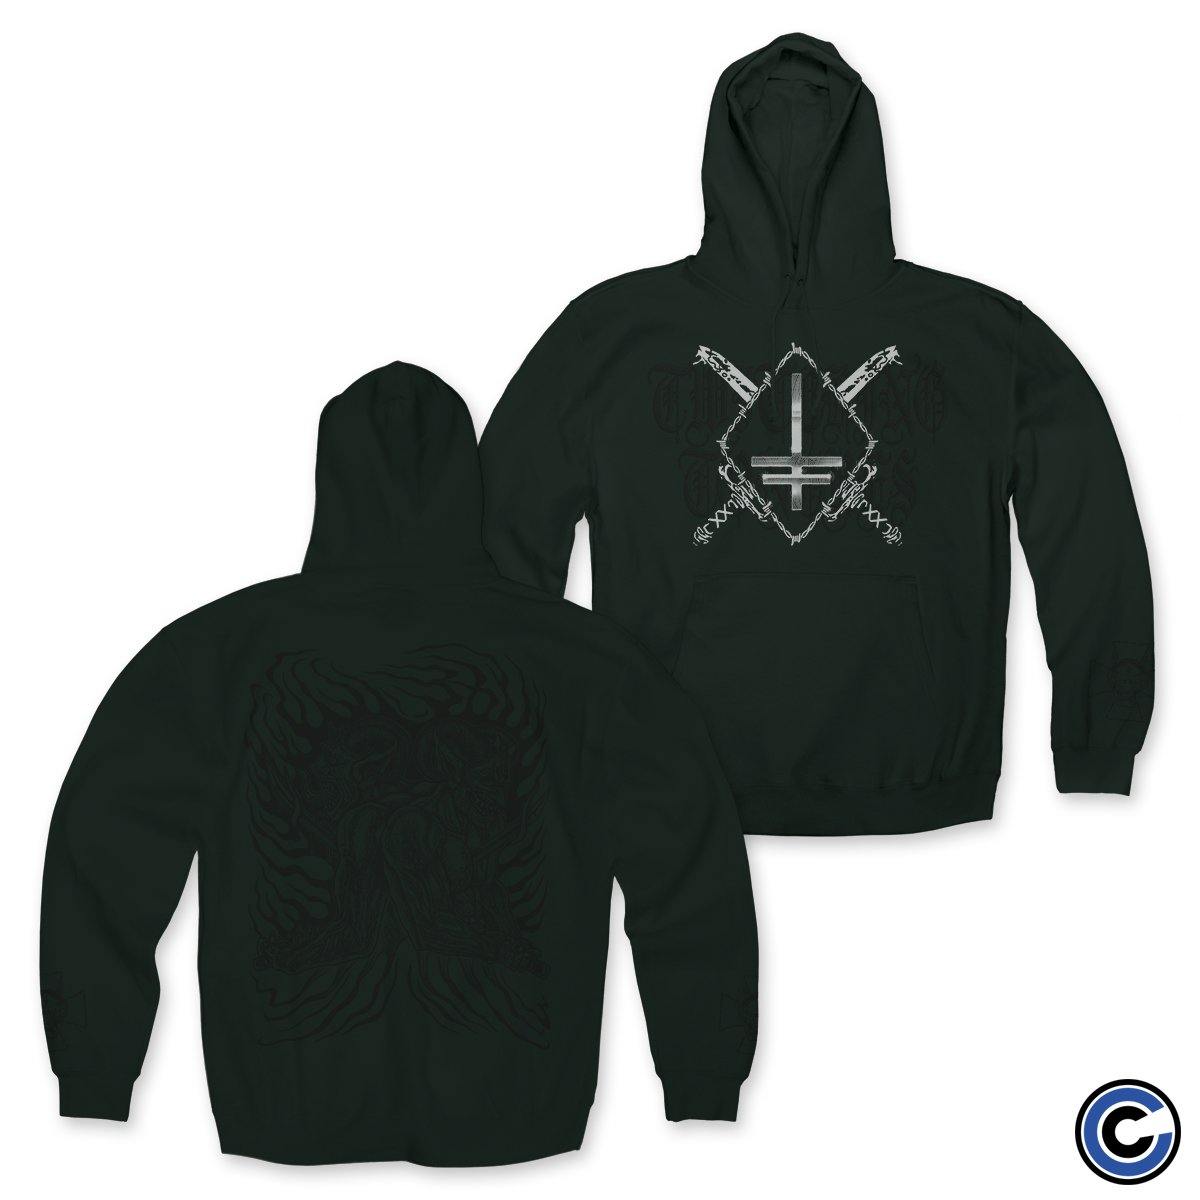 Buy – Twitching Tongues "Double Devil" Hoodie – Band & Music Merch – Cold Cuts Merch